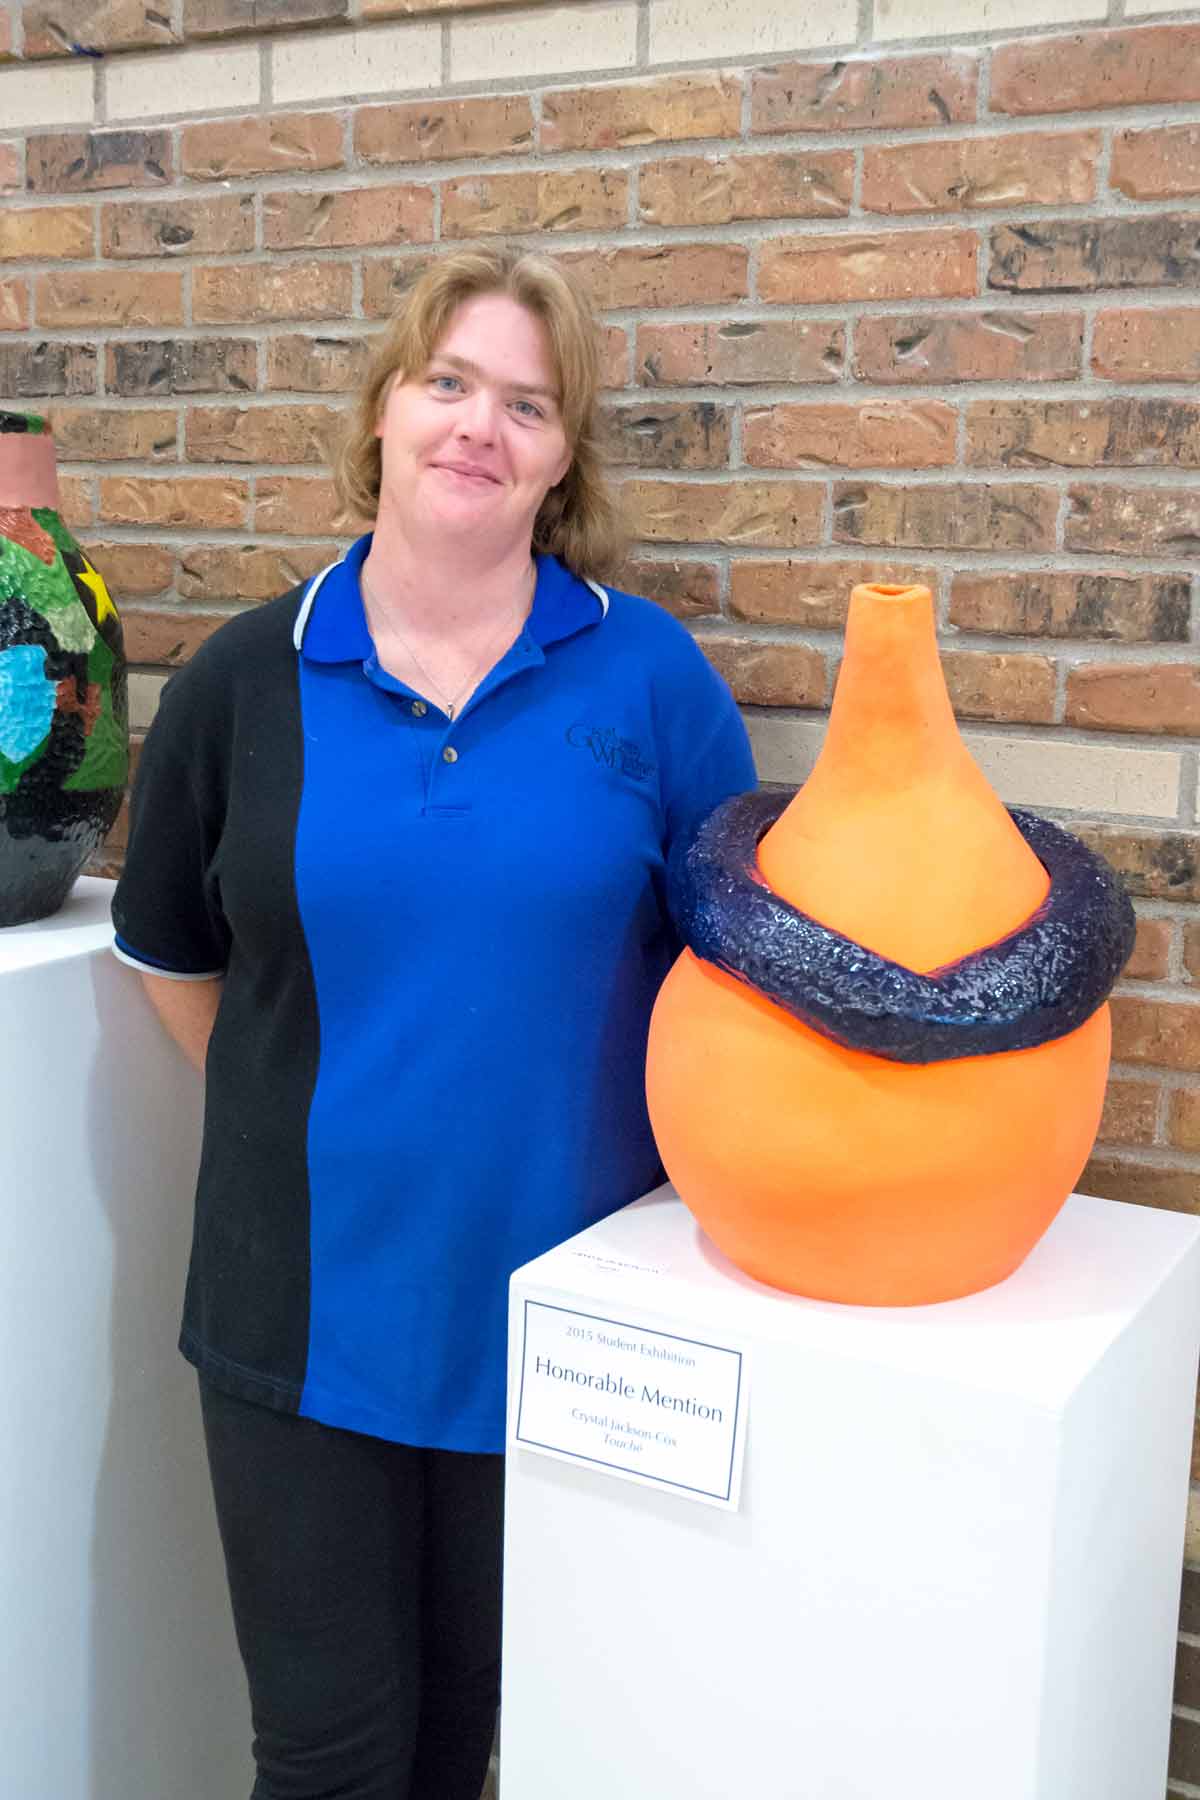 Crystal Jackson-Cox, "Touche," 2015, glazed earthenware. Honorable Mention at the "2015 Student Exhibition."